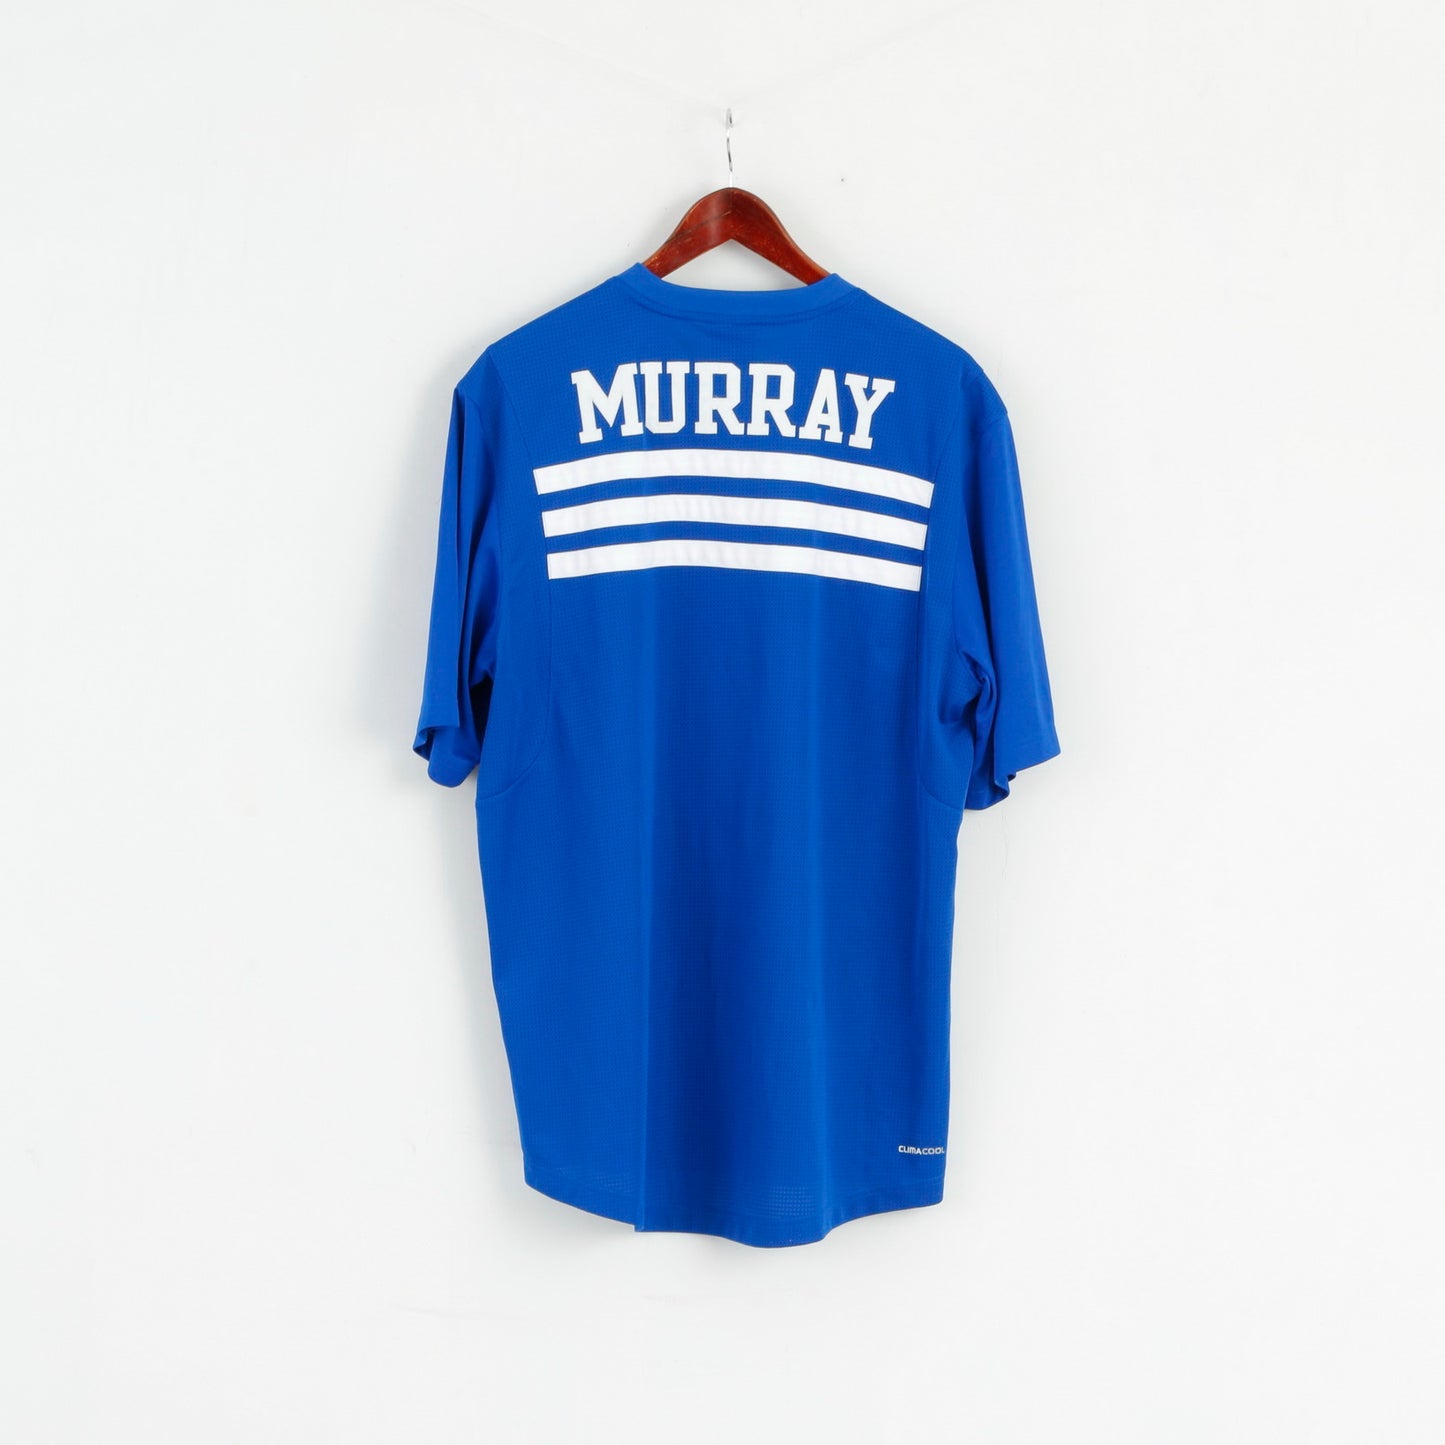 Adidas Team Mens L T- Shirt Blue Spartans Vintage MURRAY Rugby Top